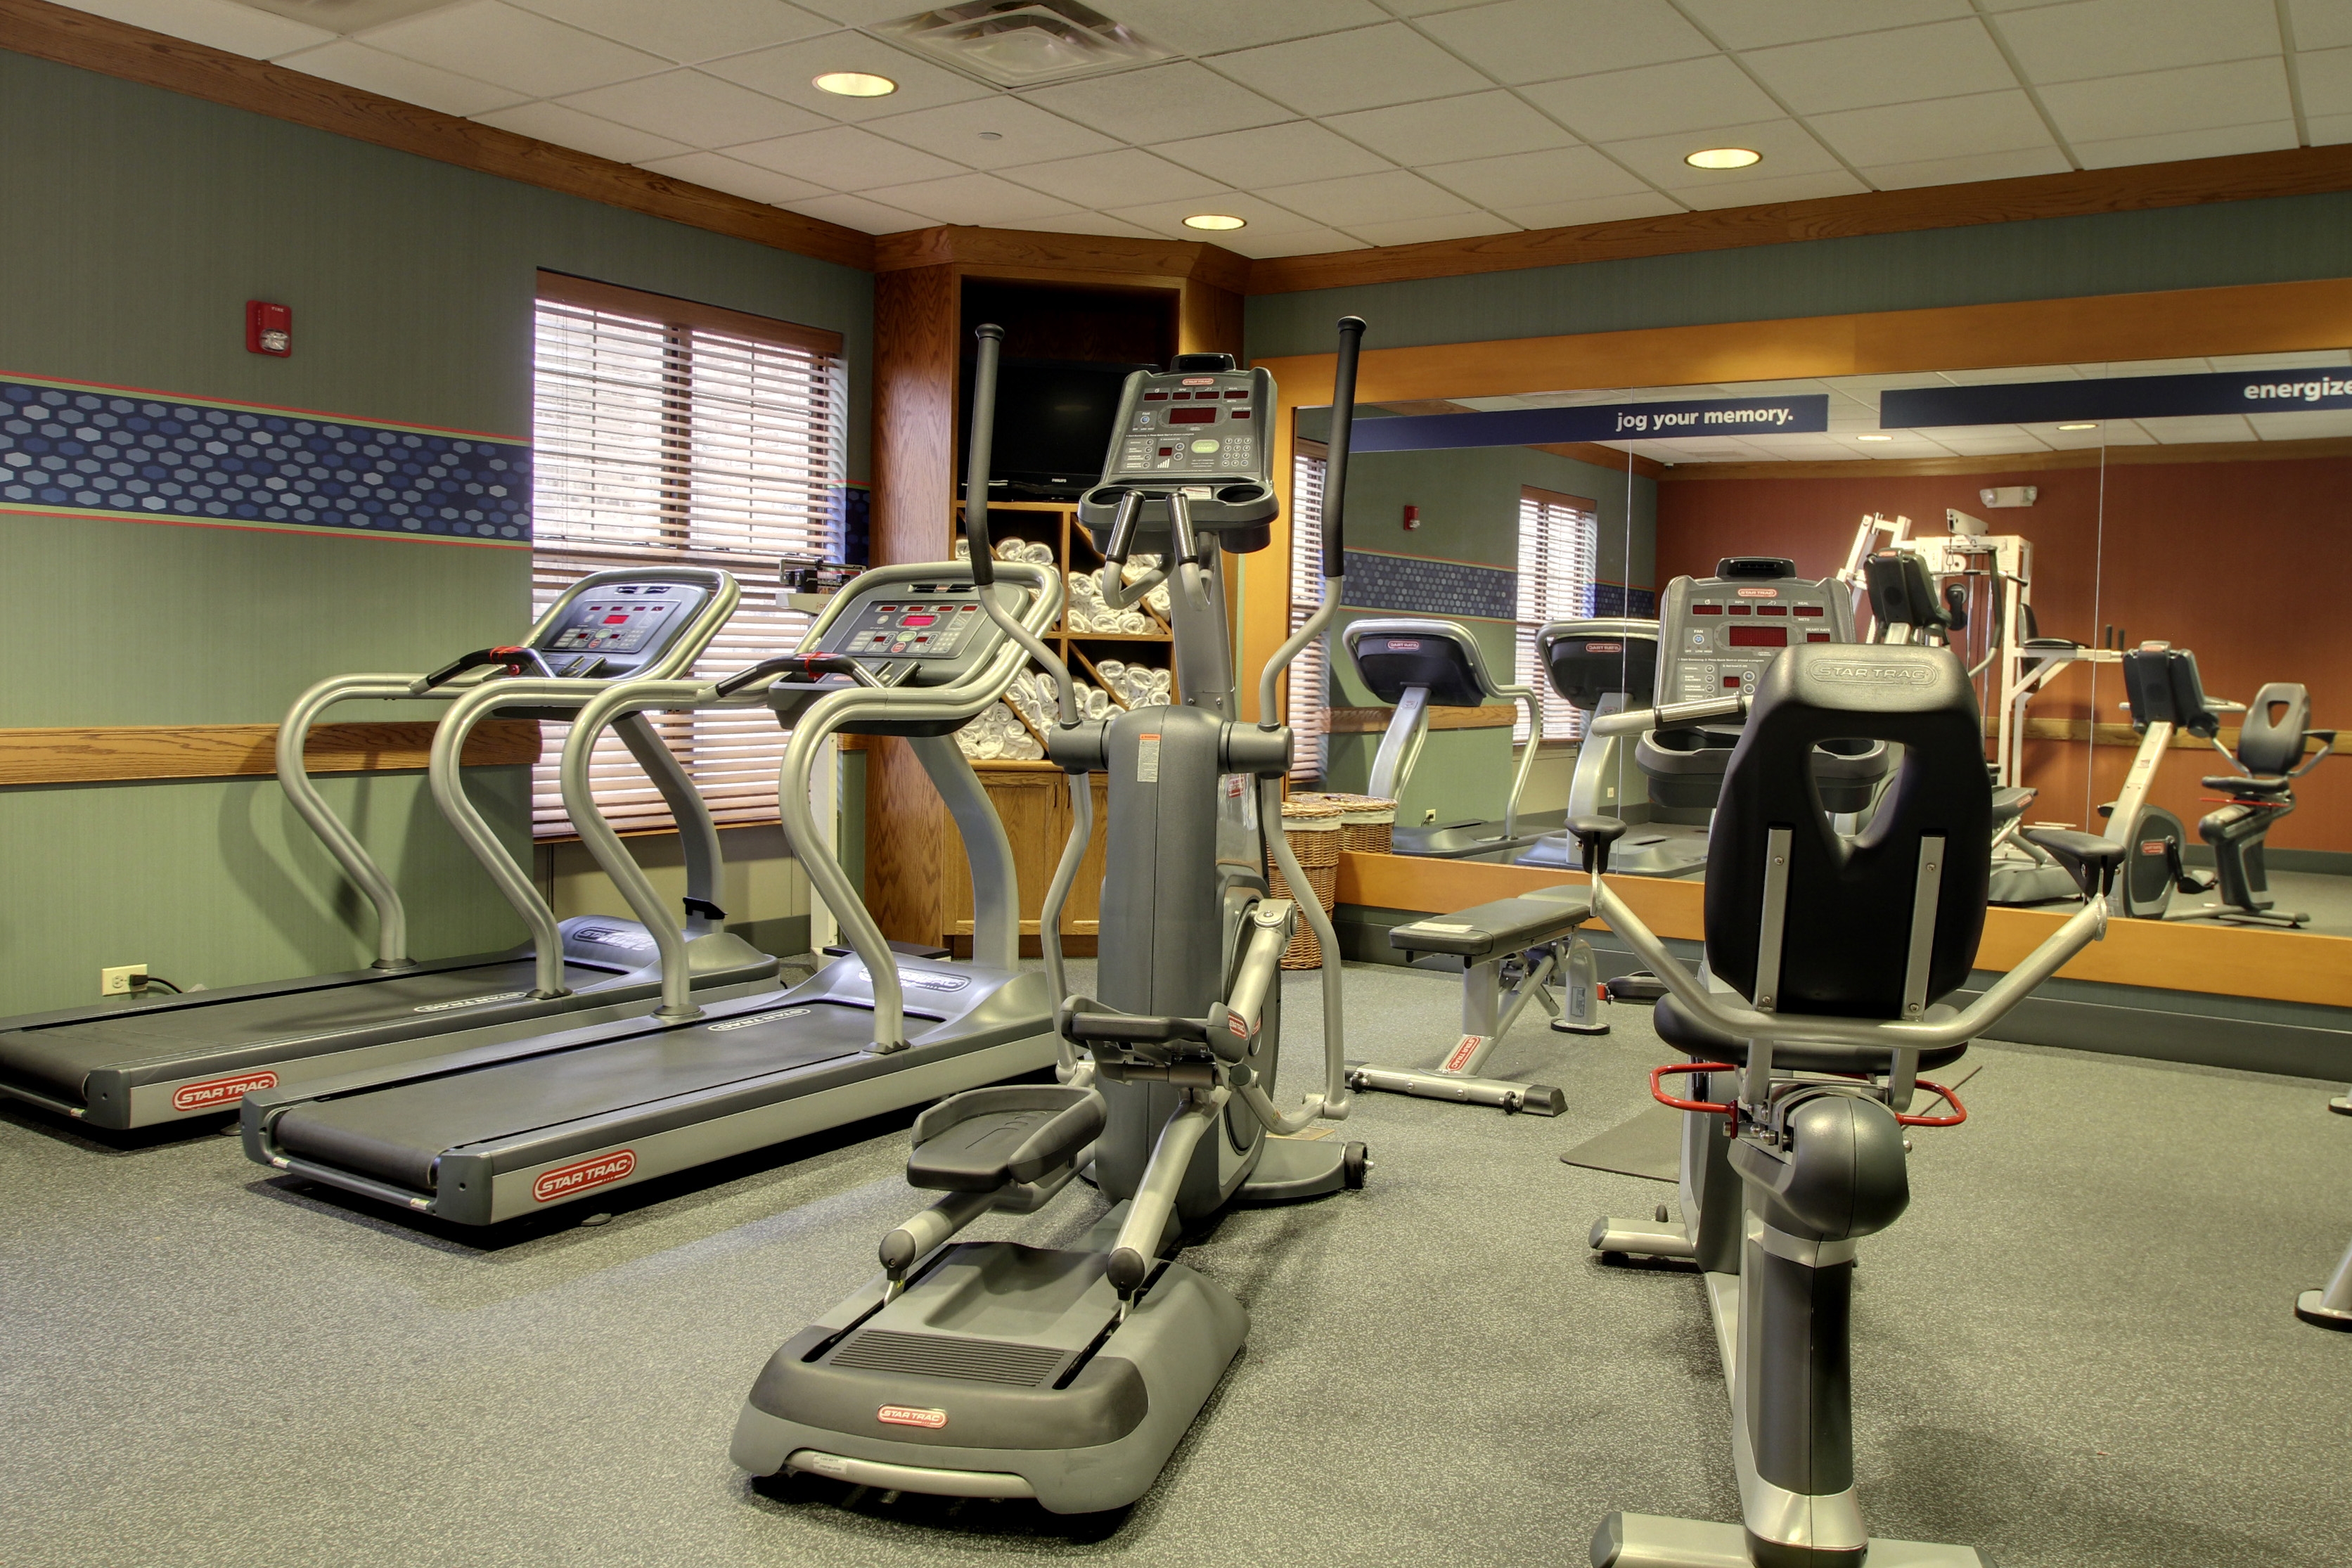 Fitness Center With Cardio Equipment Facing Mirrored Wall